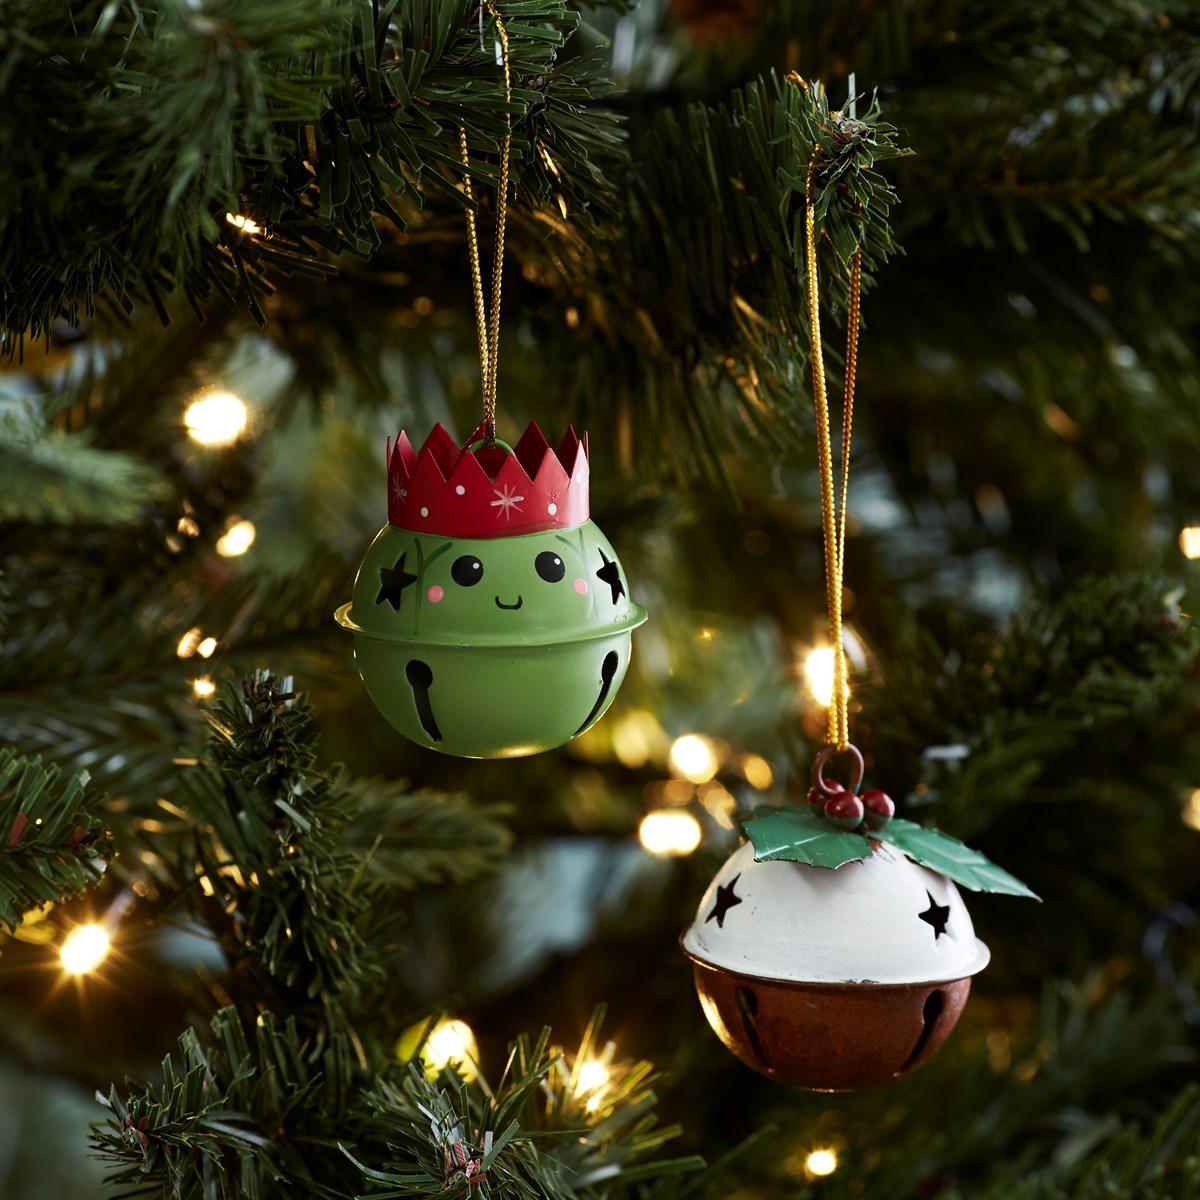 Brussel Sprout Hanging Bell Christmas Tree Bauble - ad&i